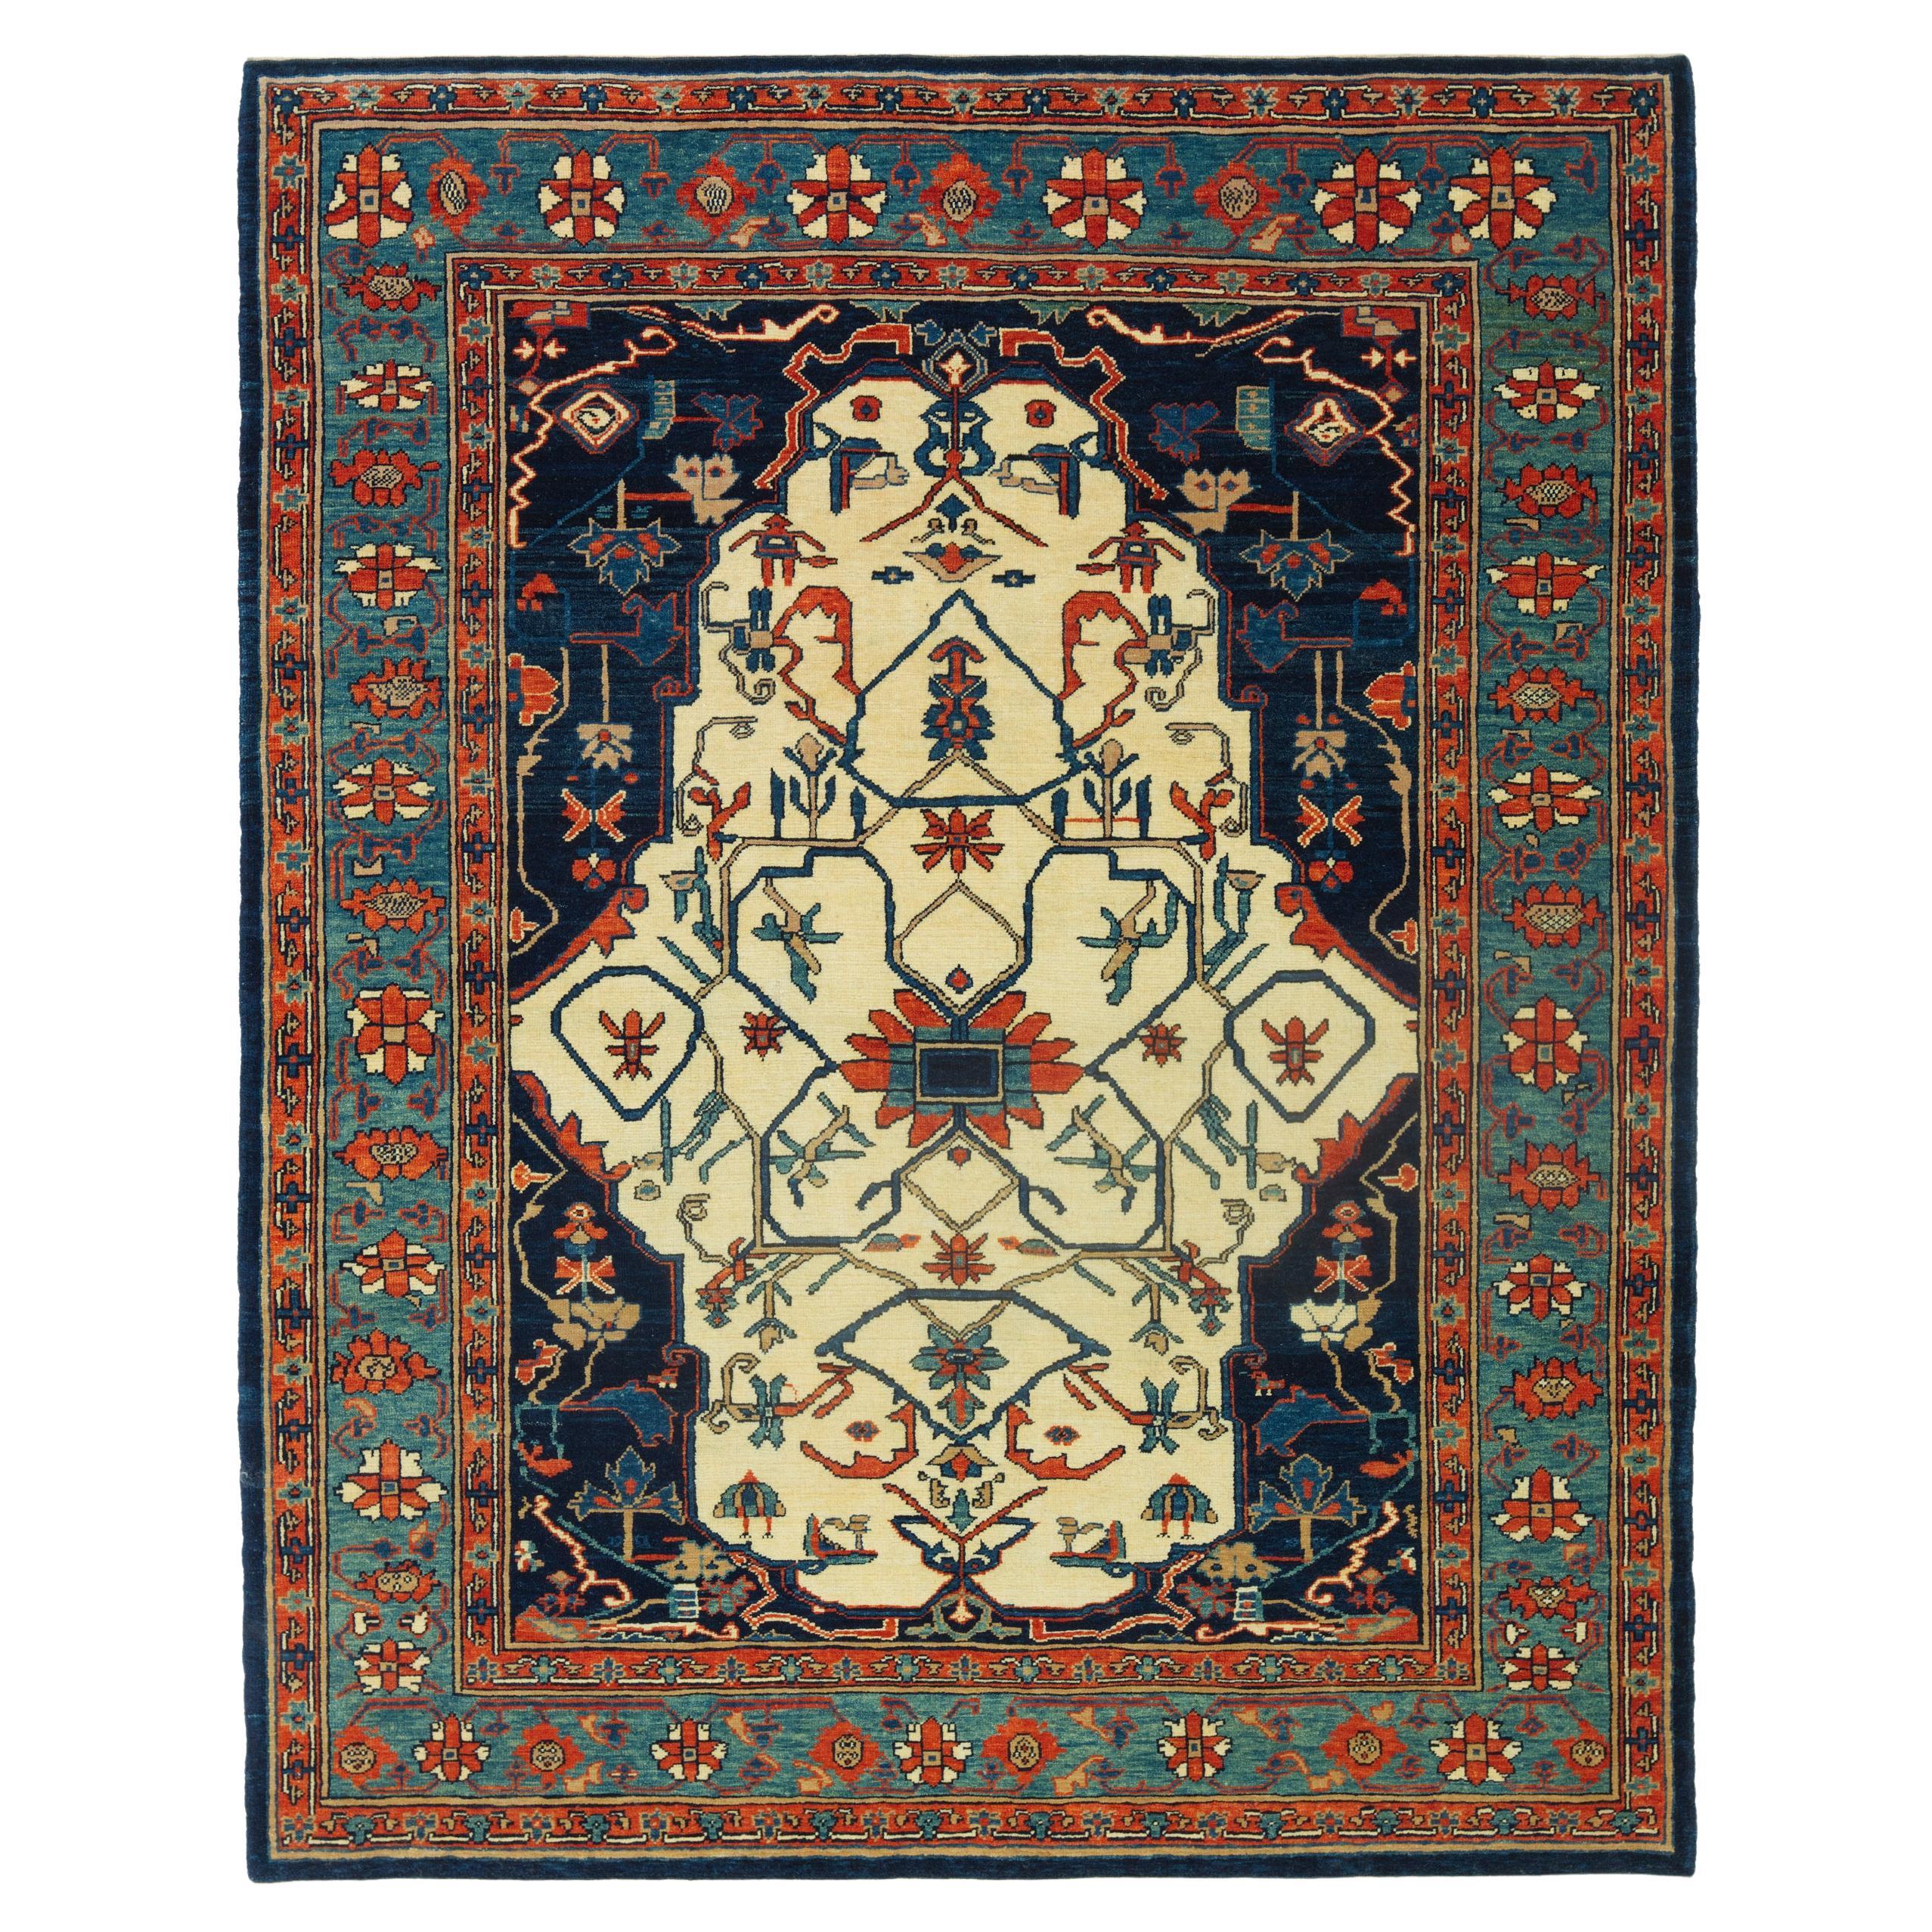 Ararat Rugs Heriz White Ground Rug - 19th C. Persian Revival Carpet Natural Dyed For Sale